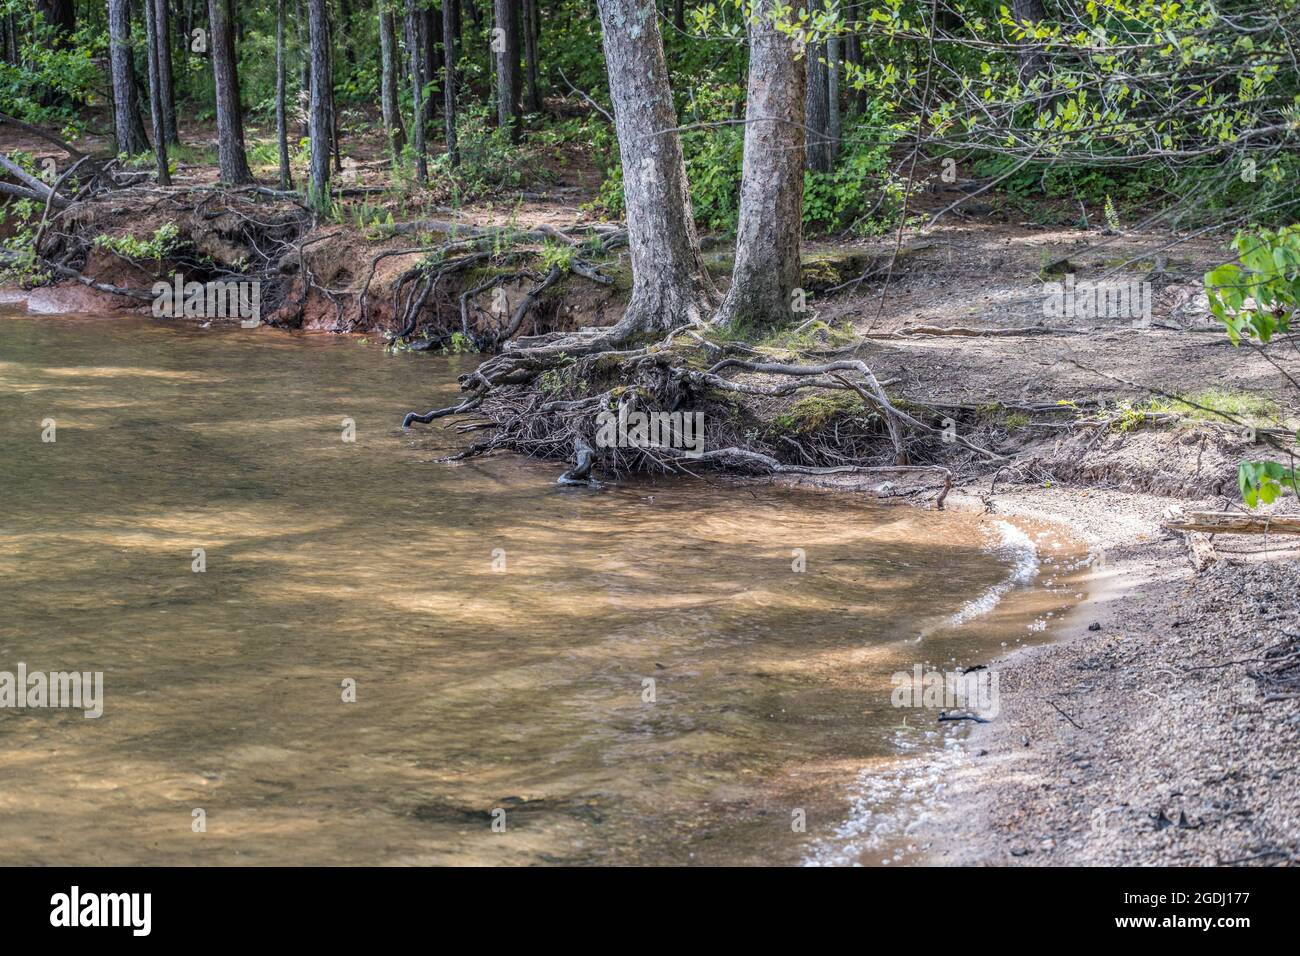 Severe erosion at the lake with low water levels exposing the tree roots along the trails in late springtime Stock Photo